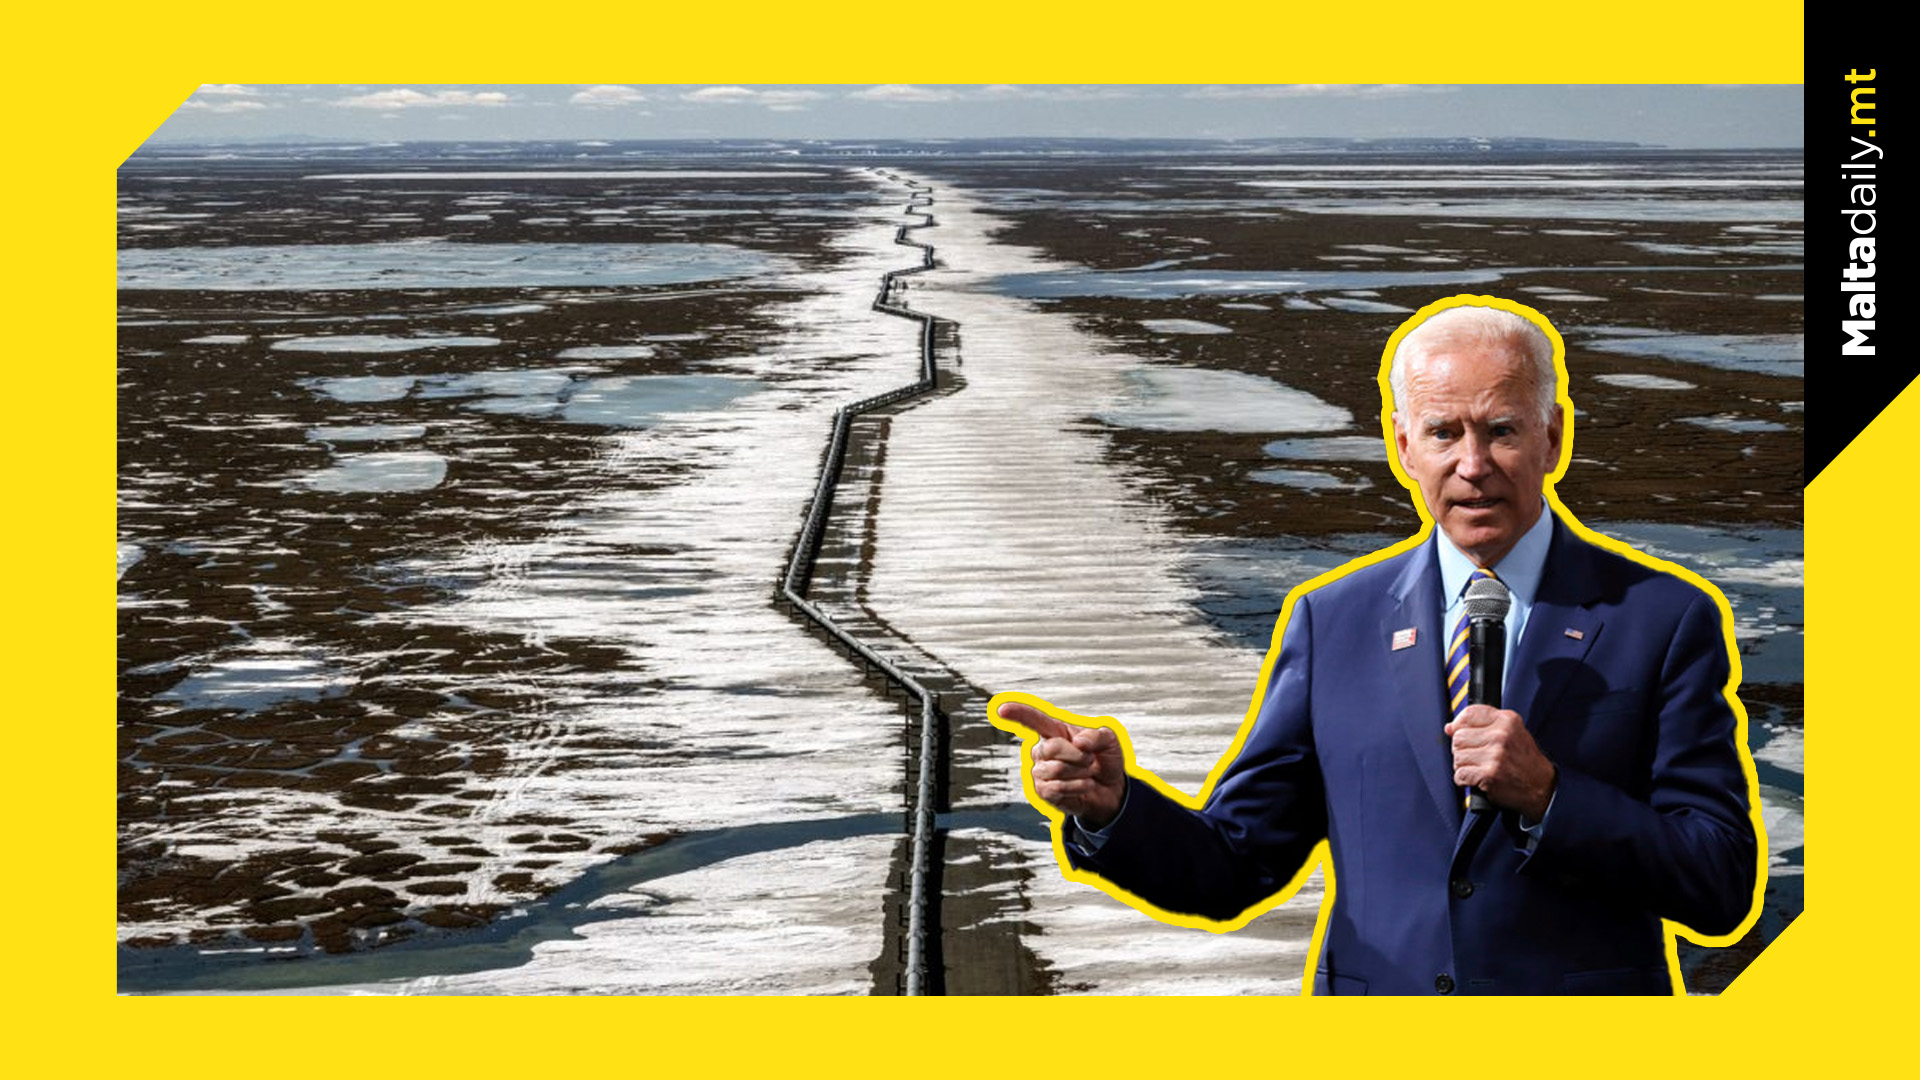 What is the Willow Project? Controversial oil-drilling project approved by Joe Biden administration